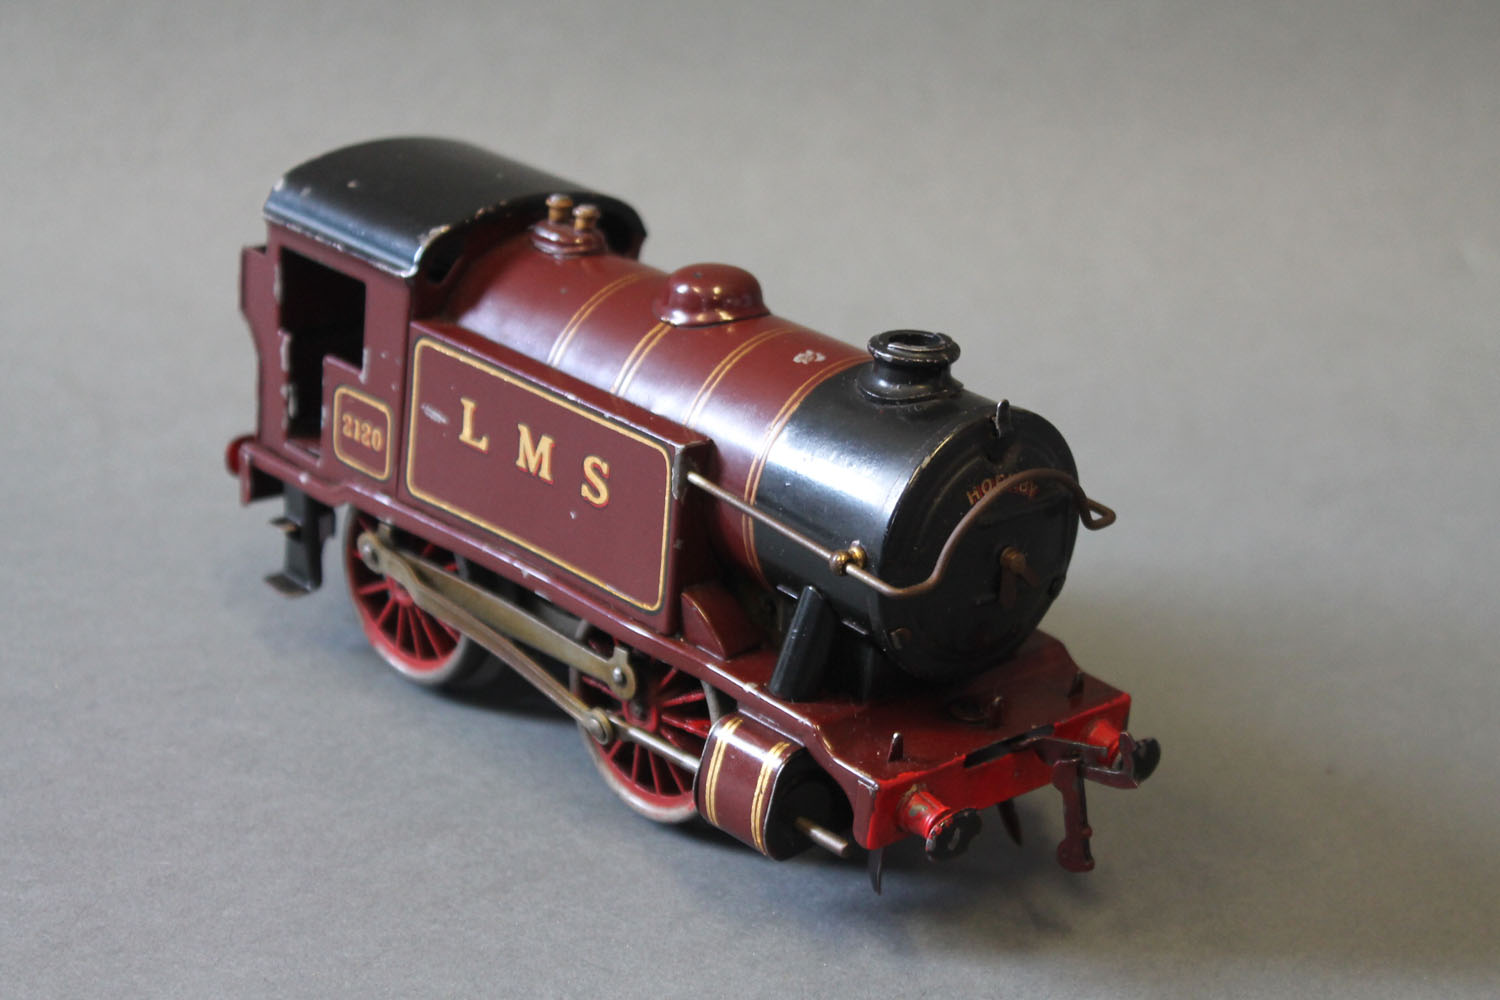 A Hornby 0 gauge 0-4-0 special tank locomotive, LMS, maroon livery,